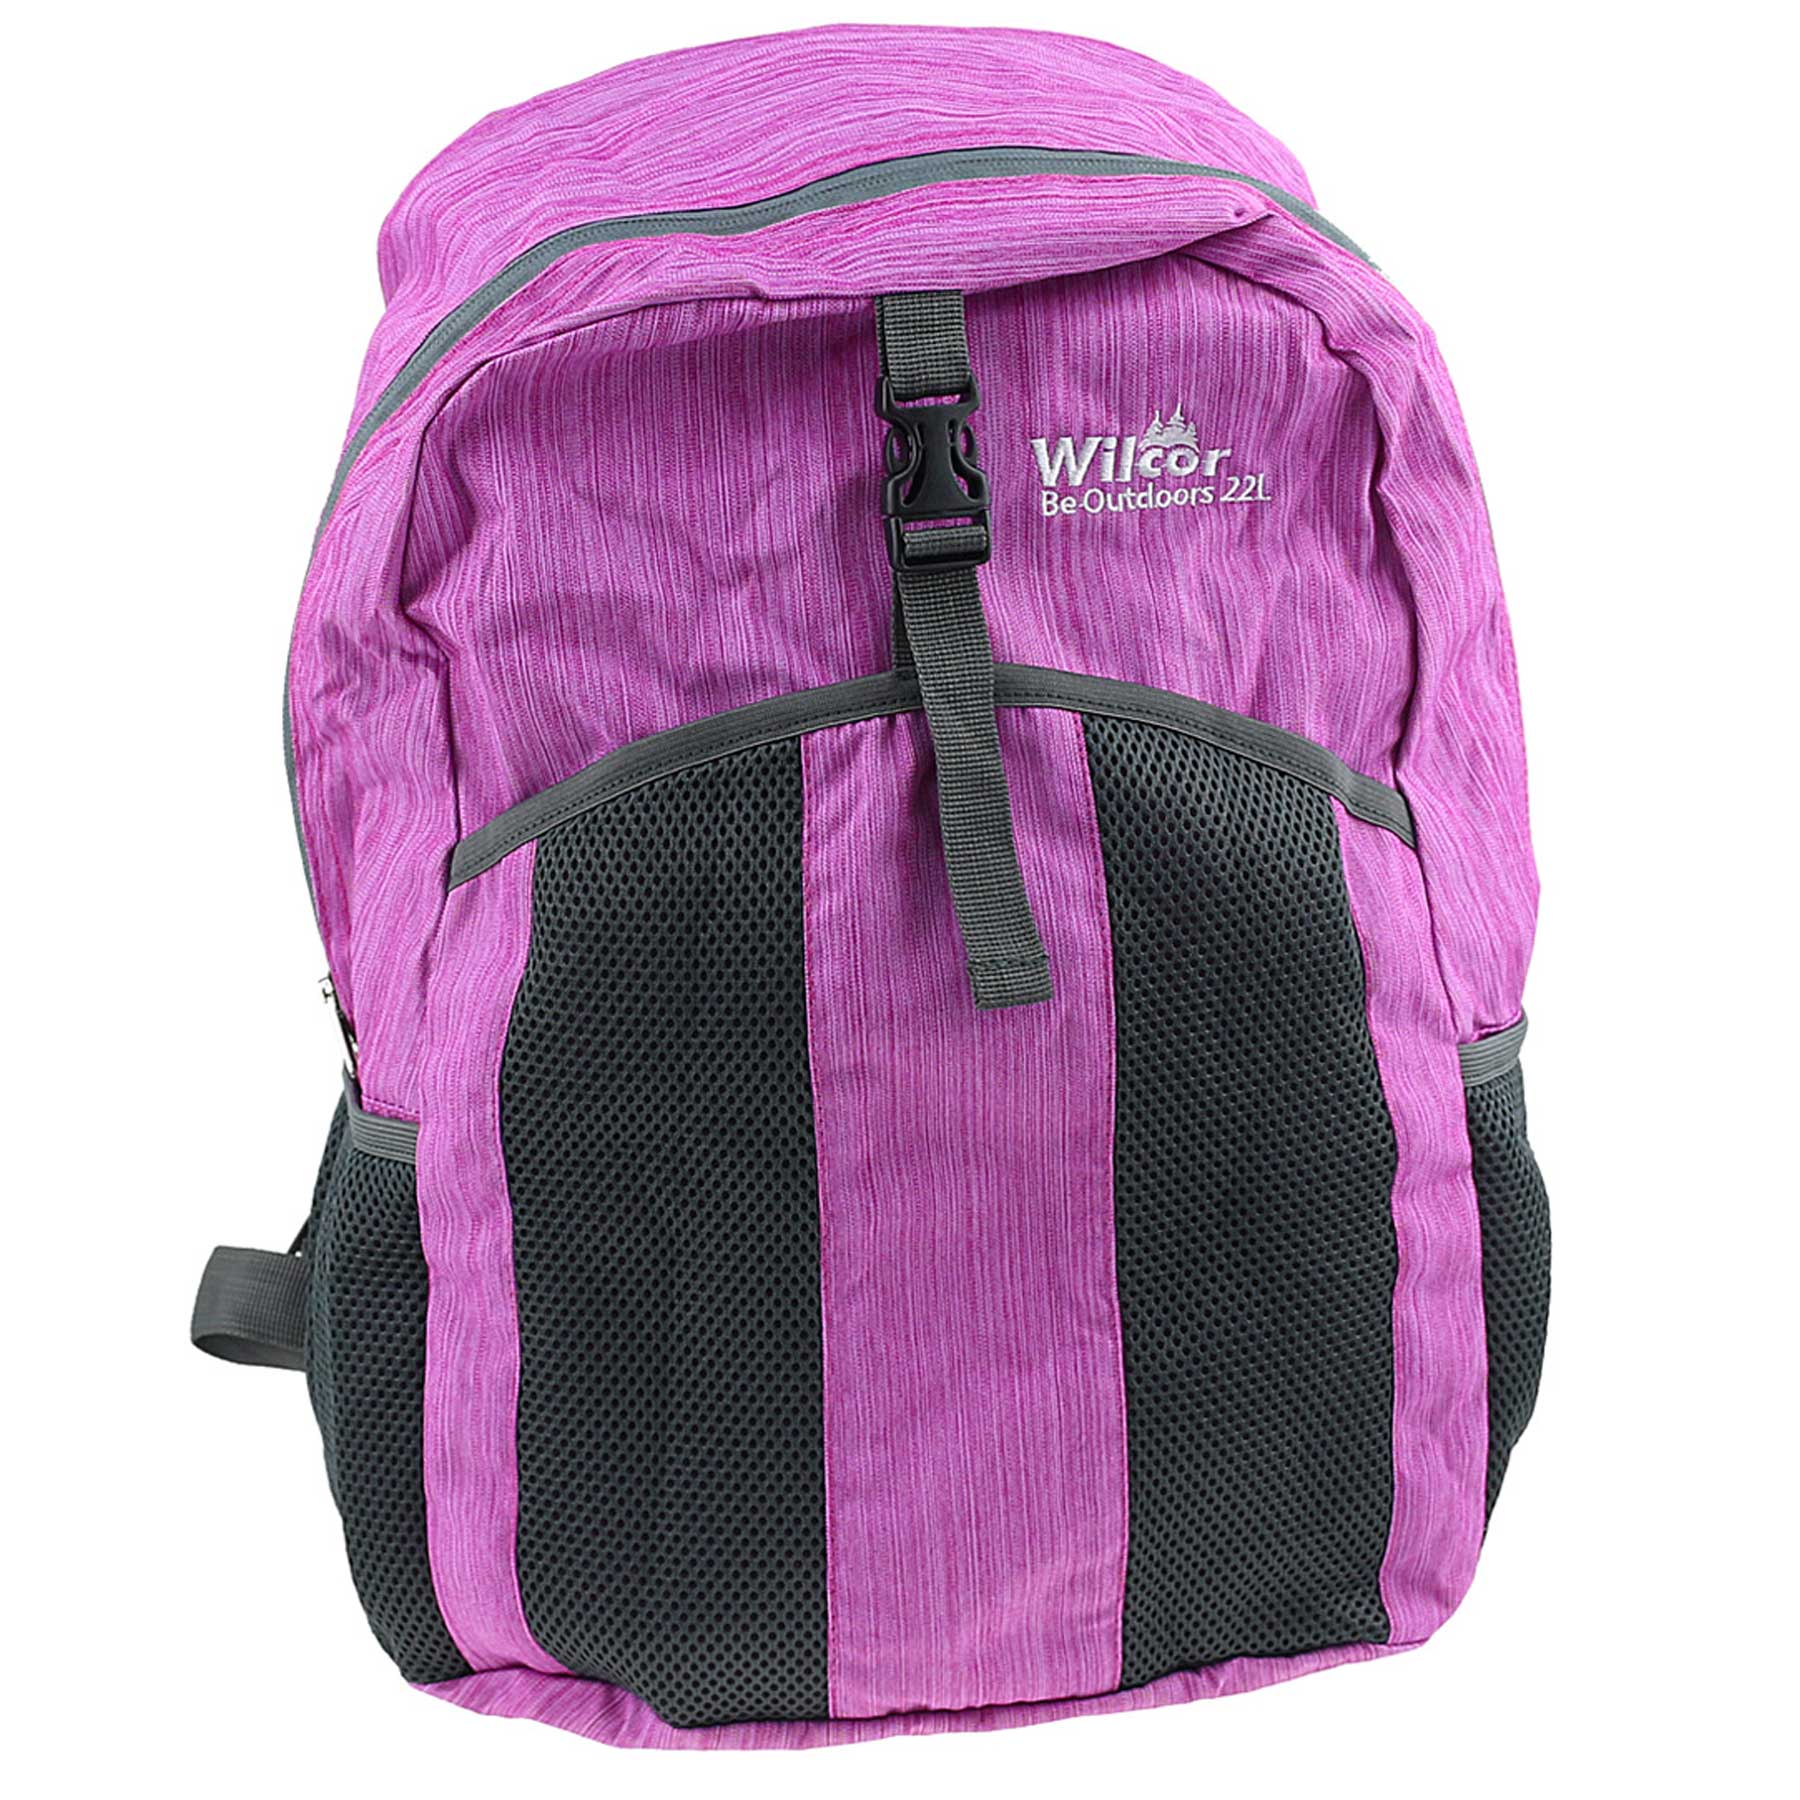 Wilcor International Wholesale Importer, Outdoor Gear,Camping, Collectable  Gifts